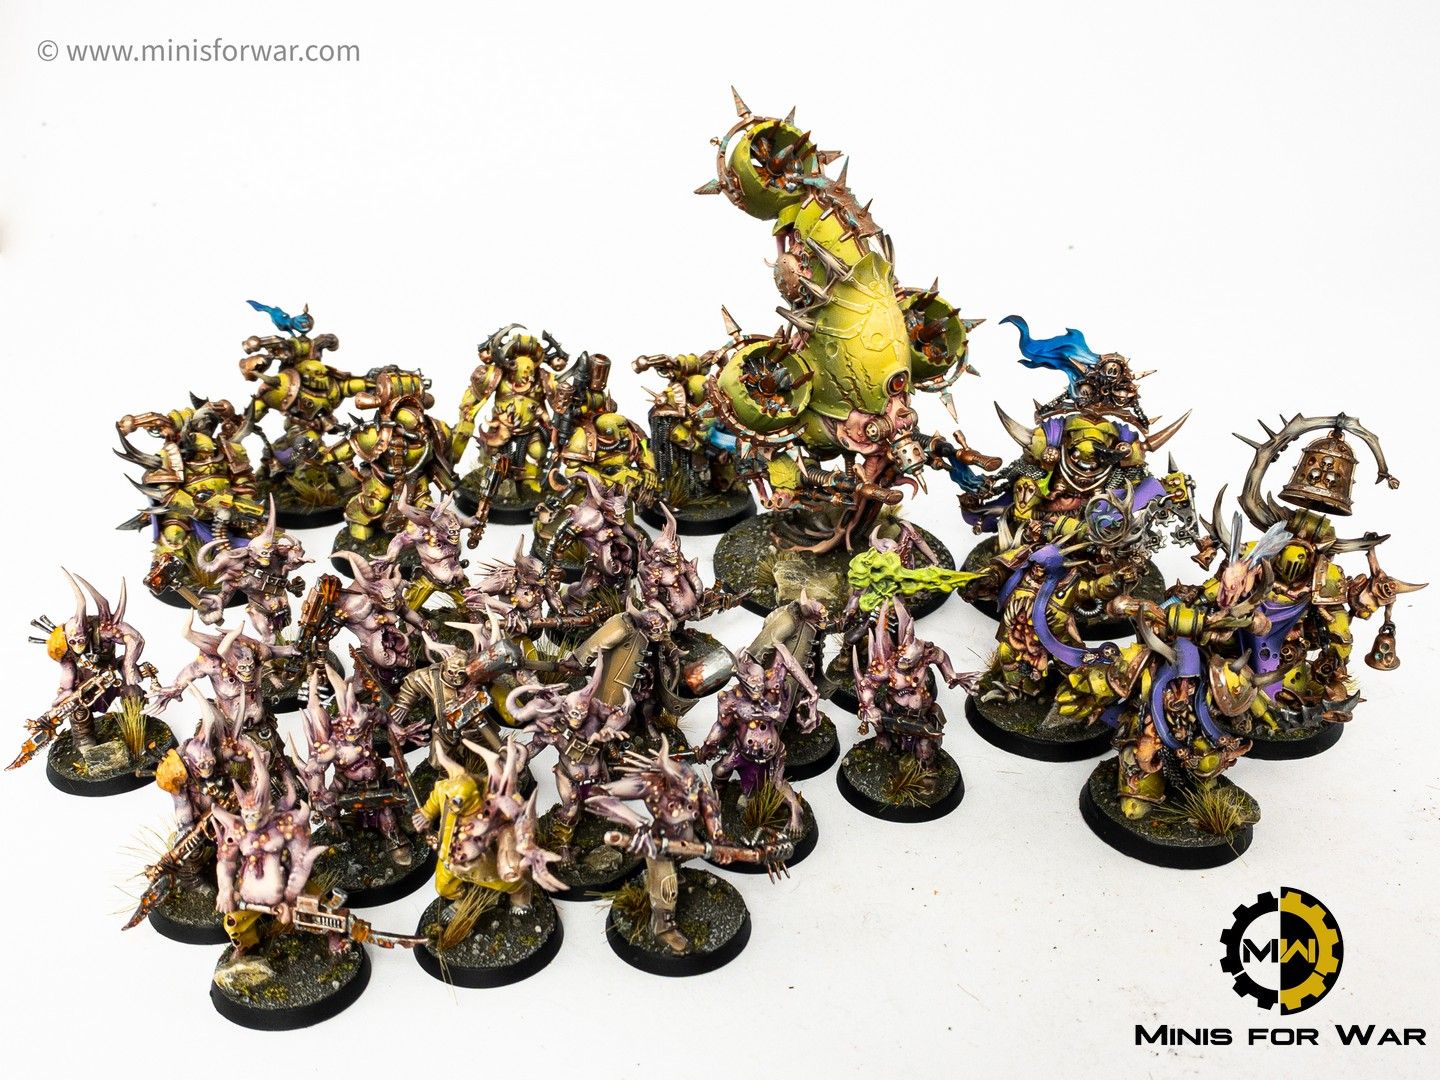 40k - Death Guard Army - Minis For War Painting Studio